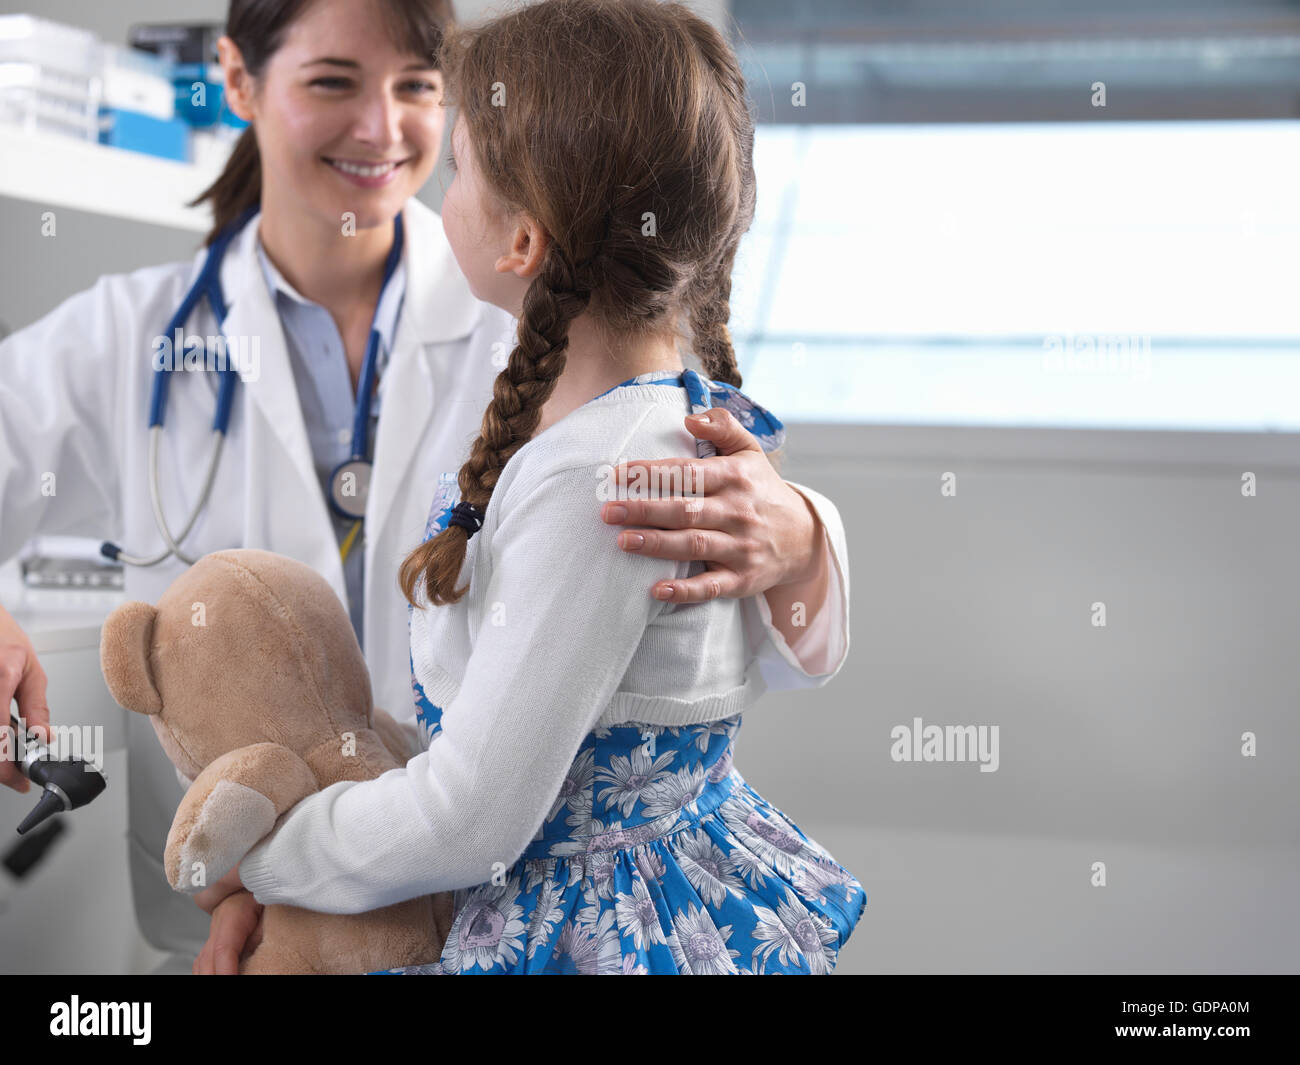 Pediatrician consulting with girl Stock Photo